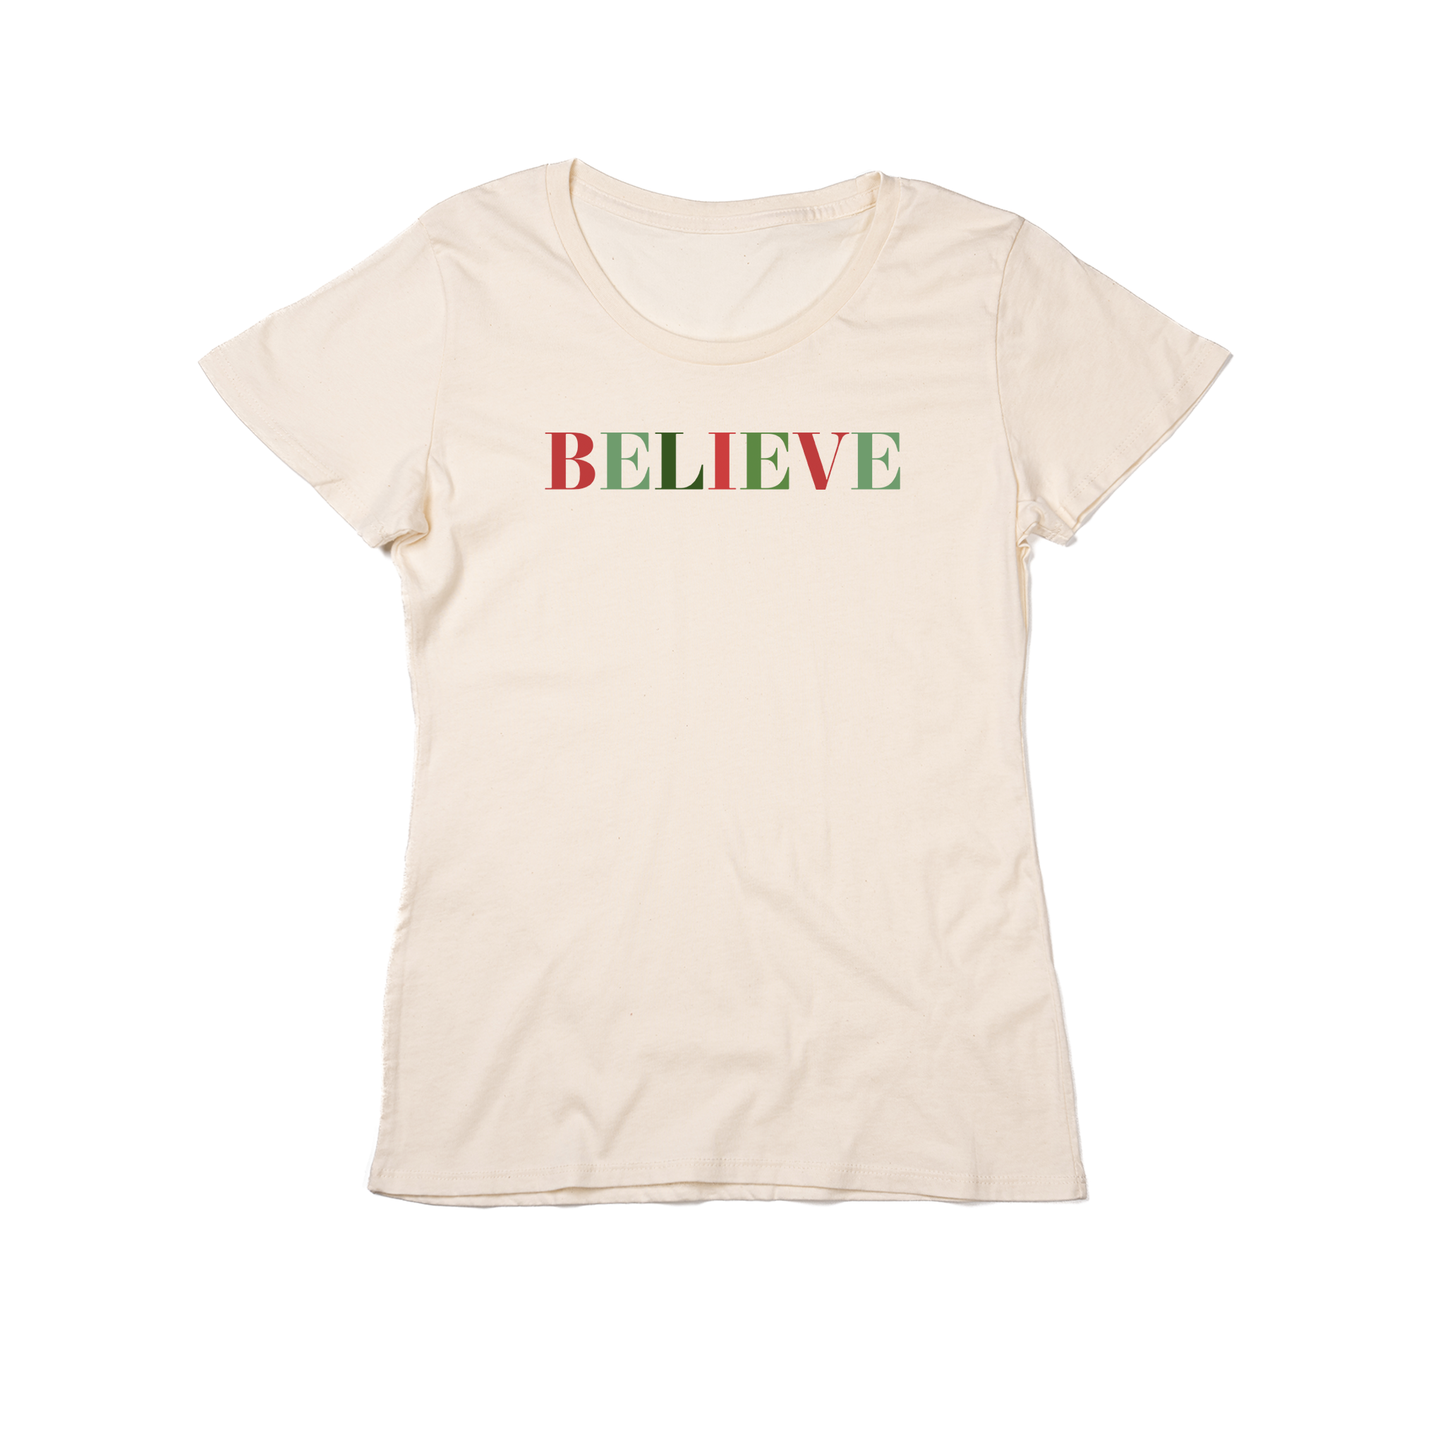 BELIEVE (Multi Color) - Women's Fitted Tee (Natural)